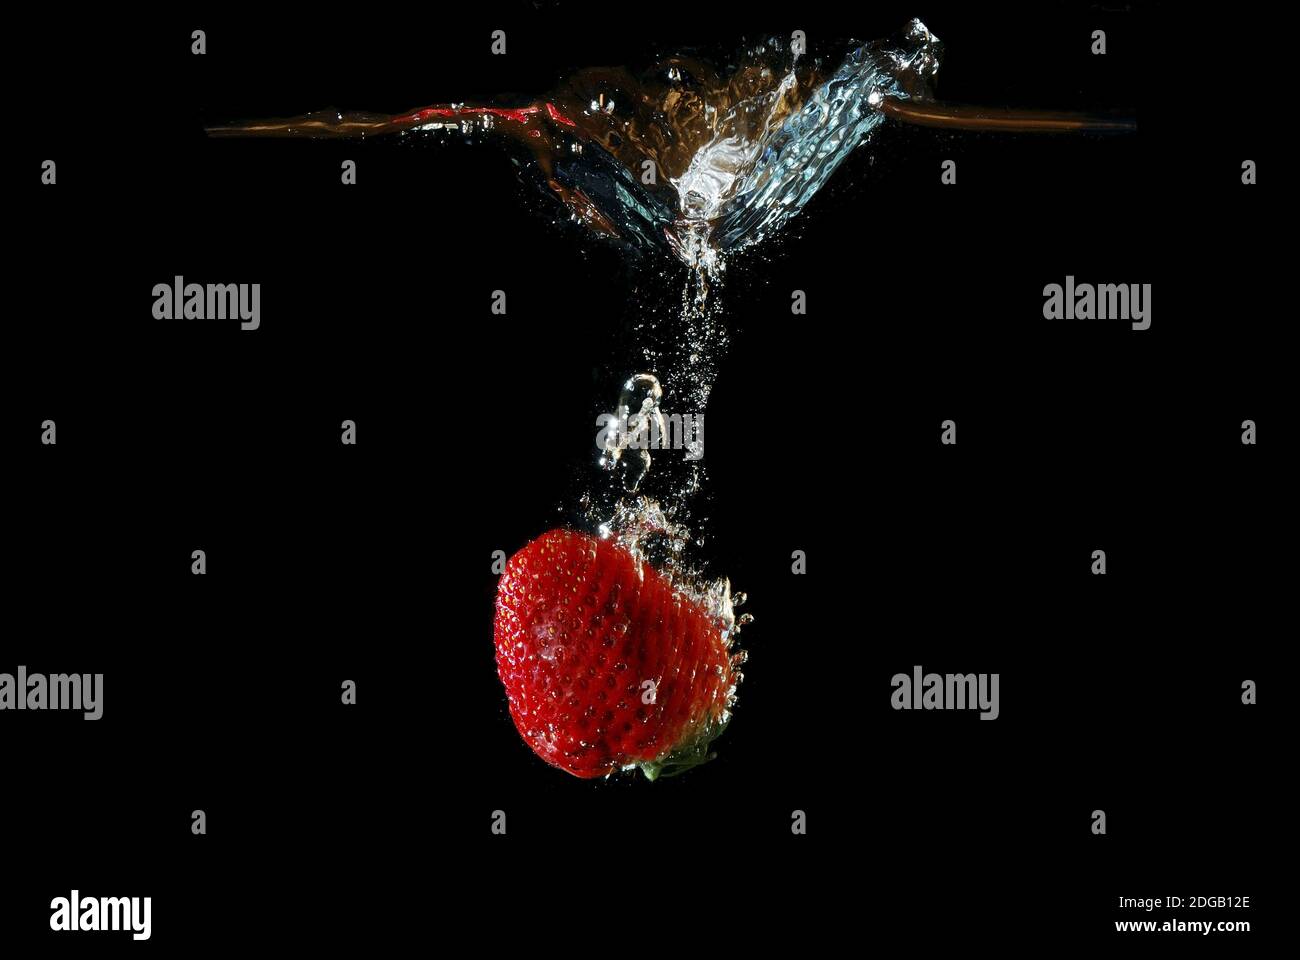 Fresh healthy strawberry falls quickly in water and injected and produced bubbles with black background Stock Photo